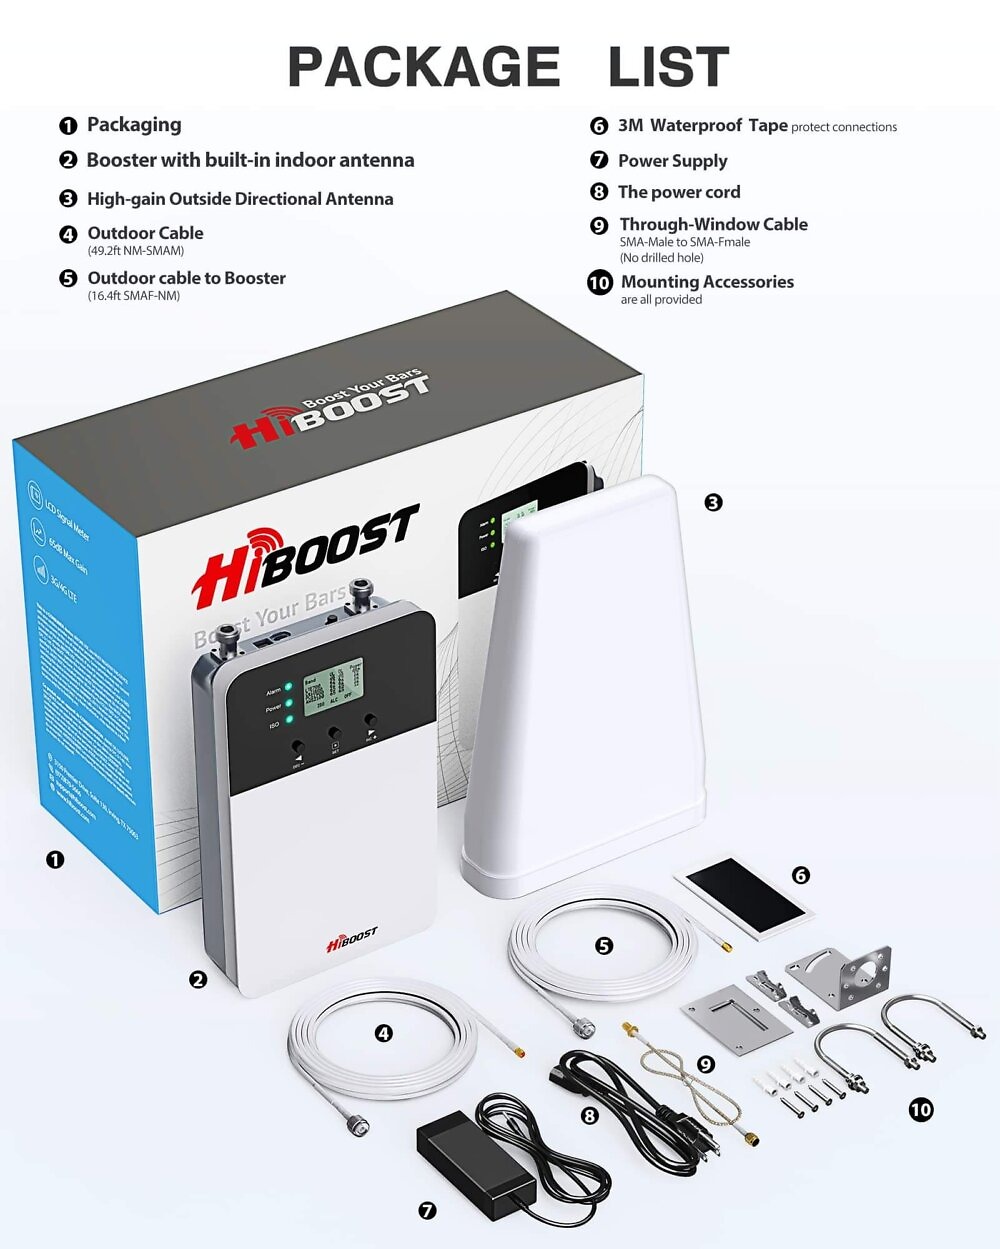 Hiboost-4K Plus Cell Phone Signal Booster (8)